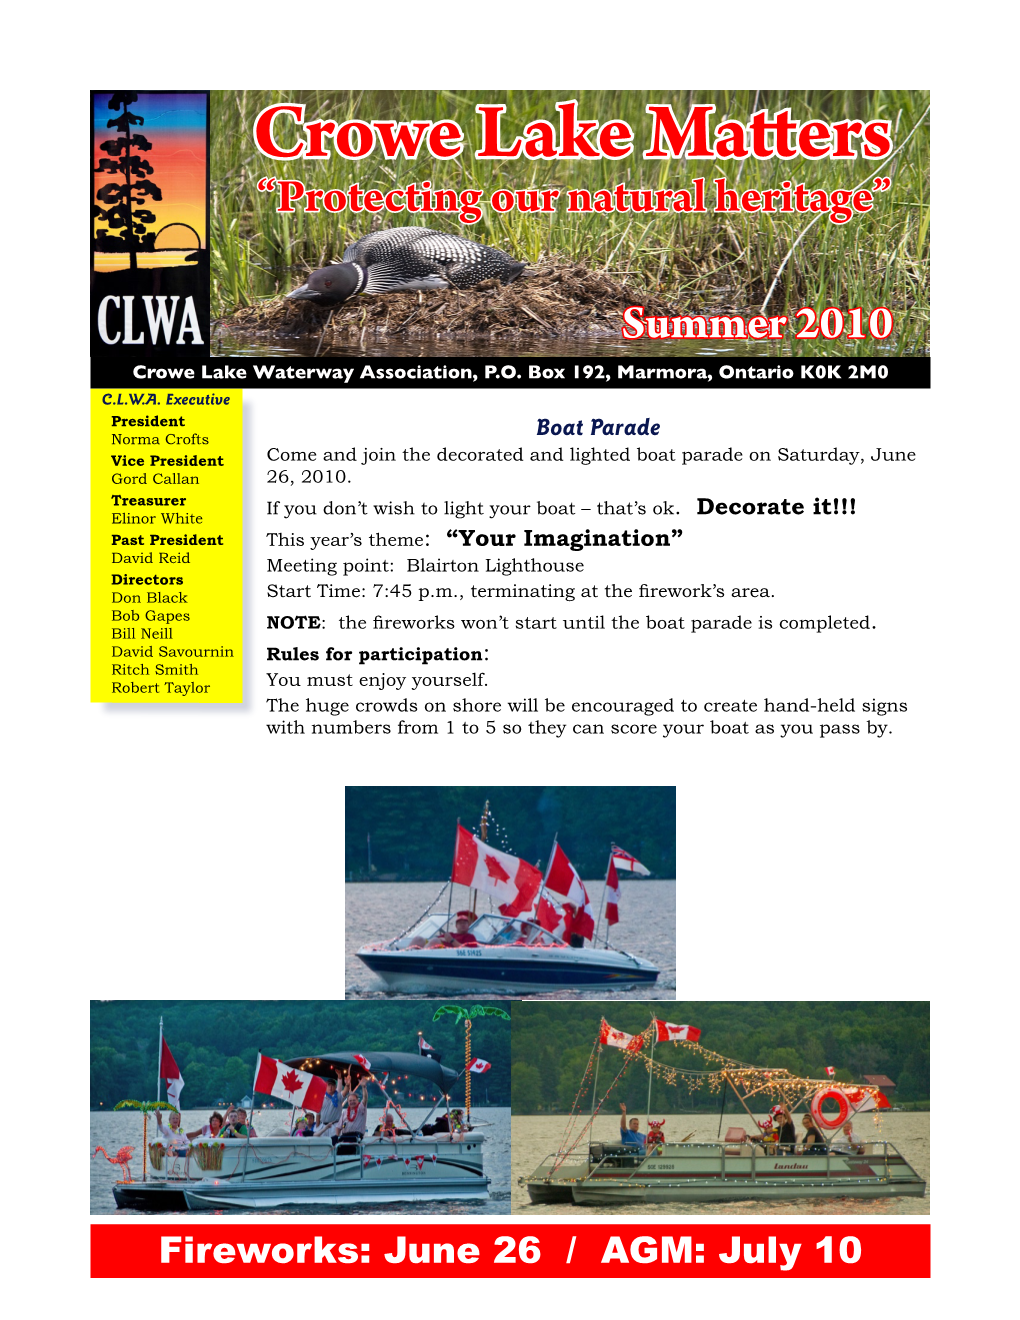 Crowe Lake Matters “Protecting Our Natural Heritage”